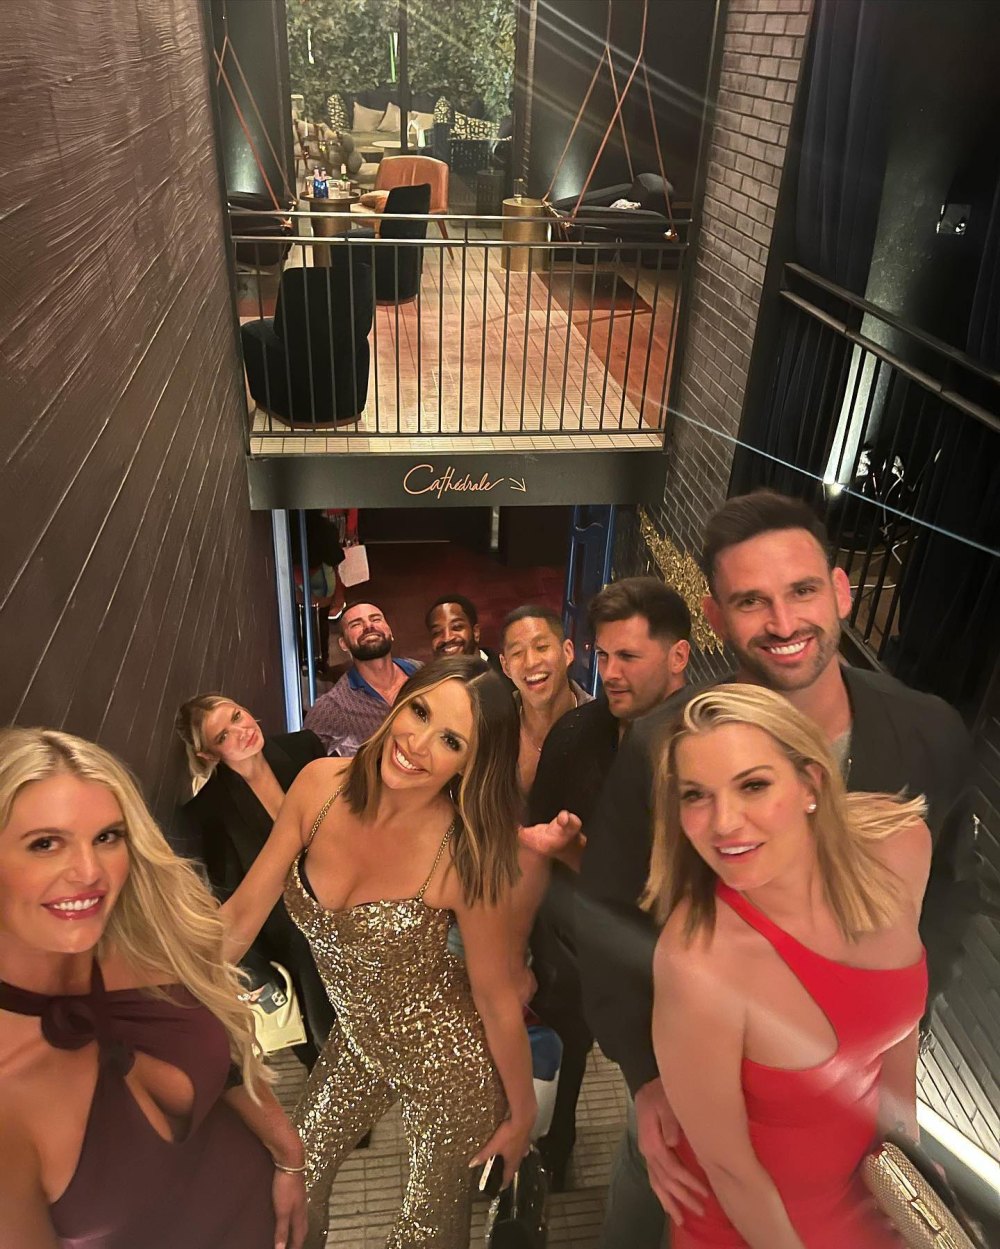 Scheana Shay Claims Lindsay Hubbard Calling Photographers on Them After Scandoval Always Does That